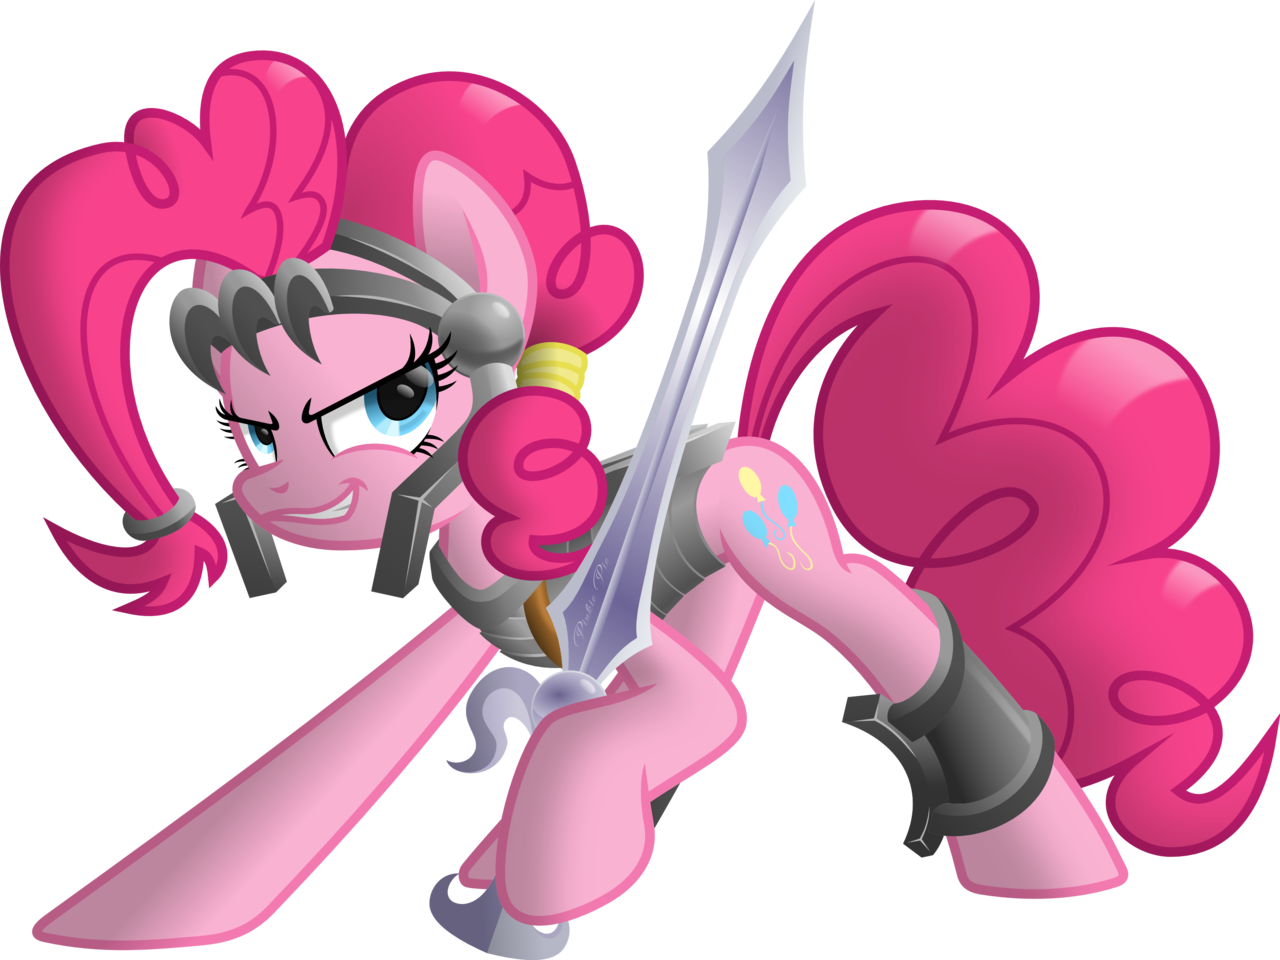 pinkie_pie_the_warrior_by_ratchethun-d5n